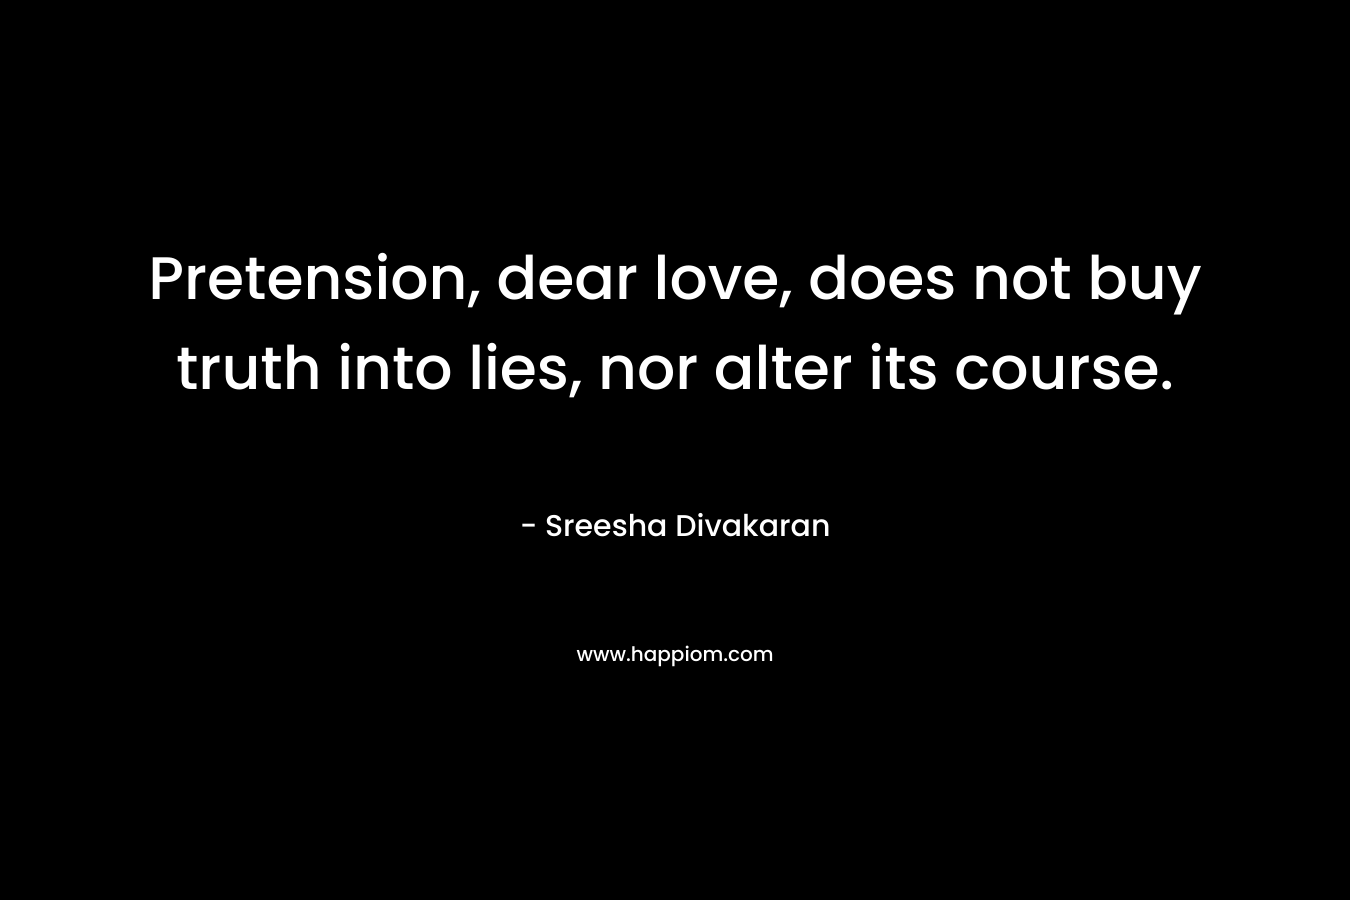 Pretension, dear love, does not buy truth into lies, nor alter its course.